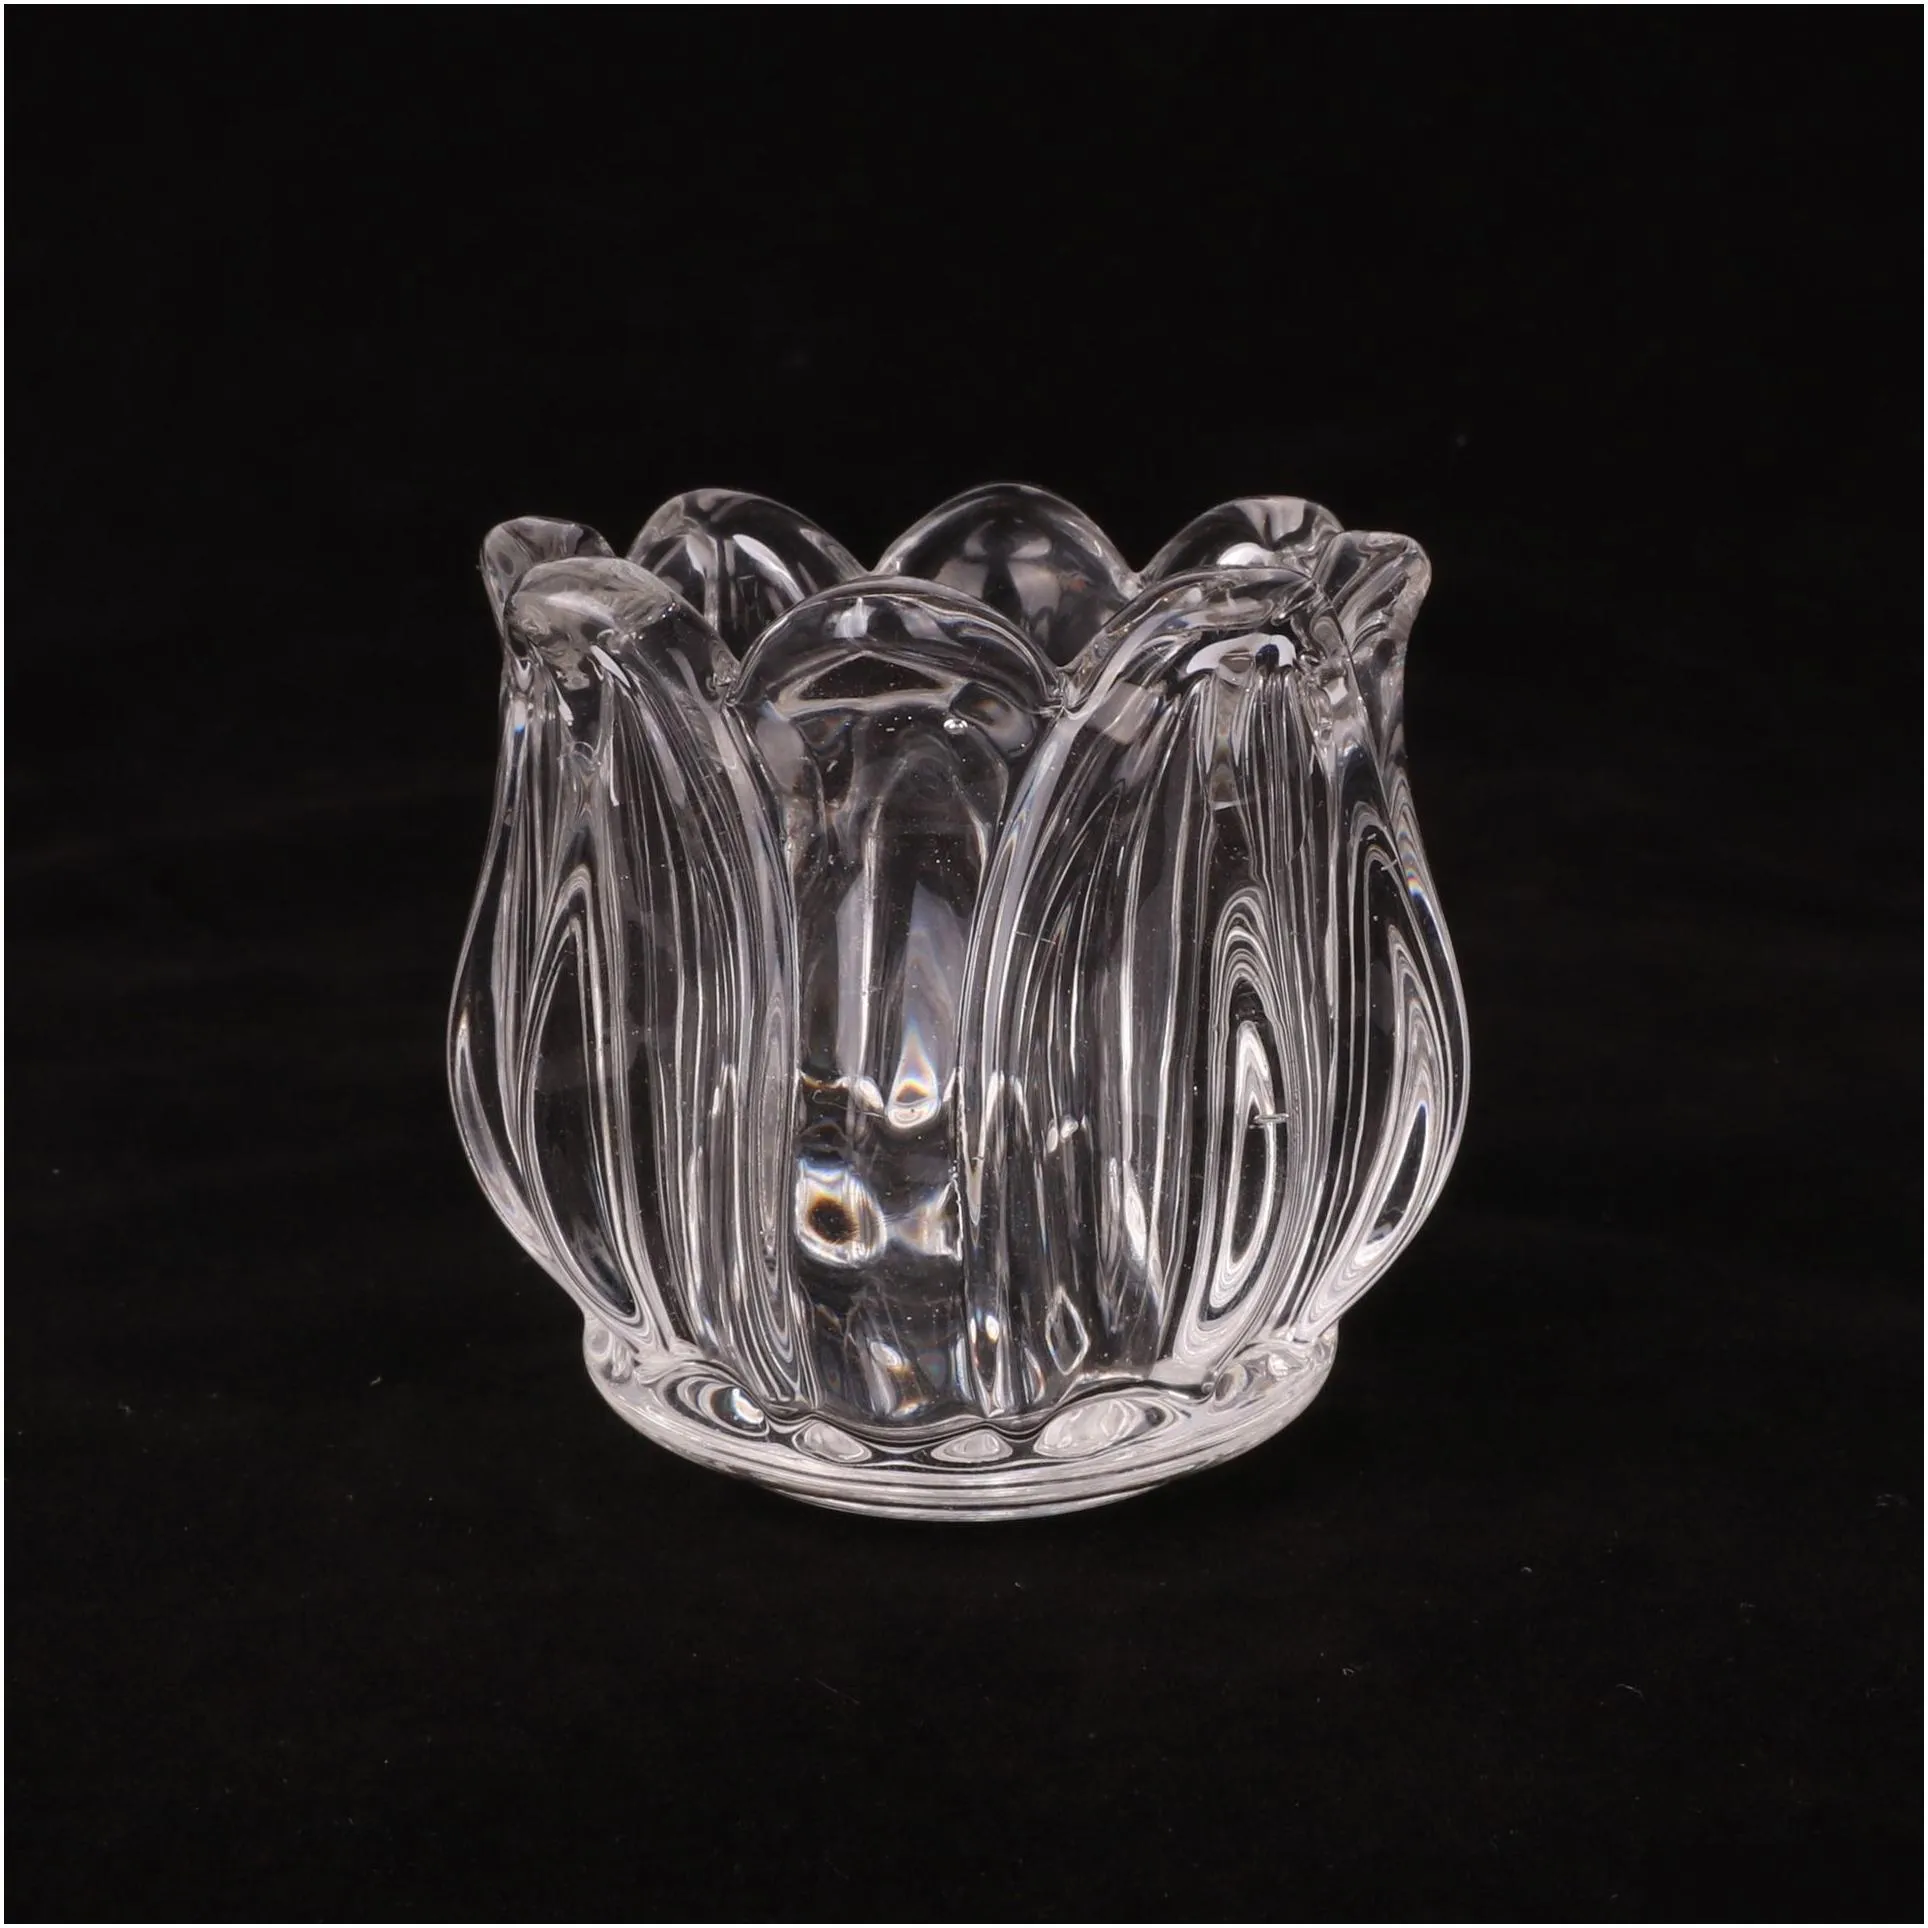 tulip flower glass candle holder crystal glass wedding decoration 2.5 inch high and caliber